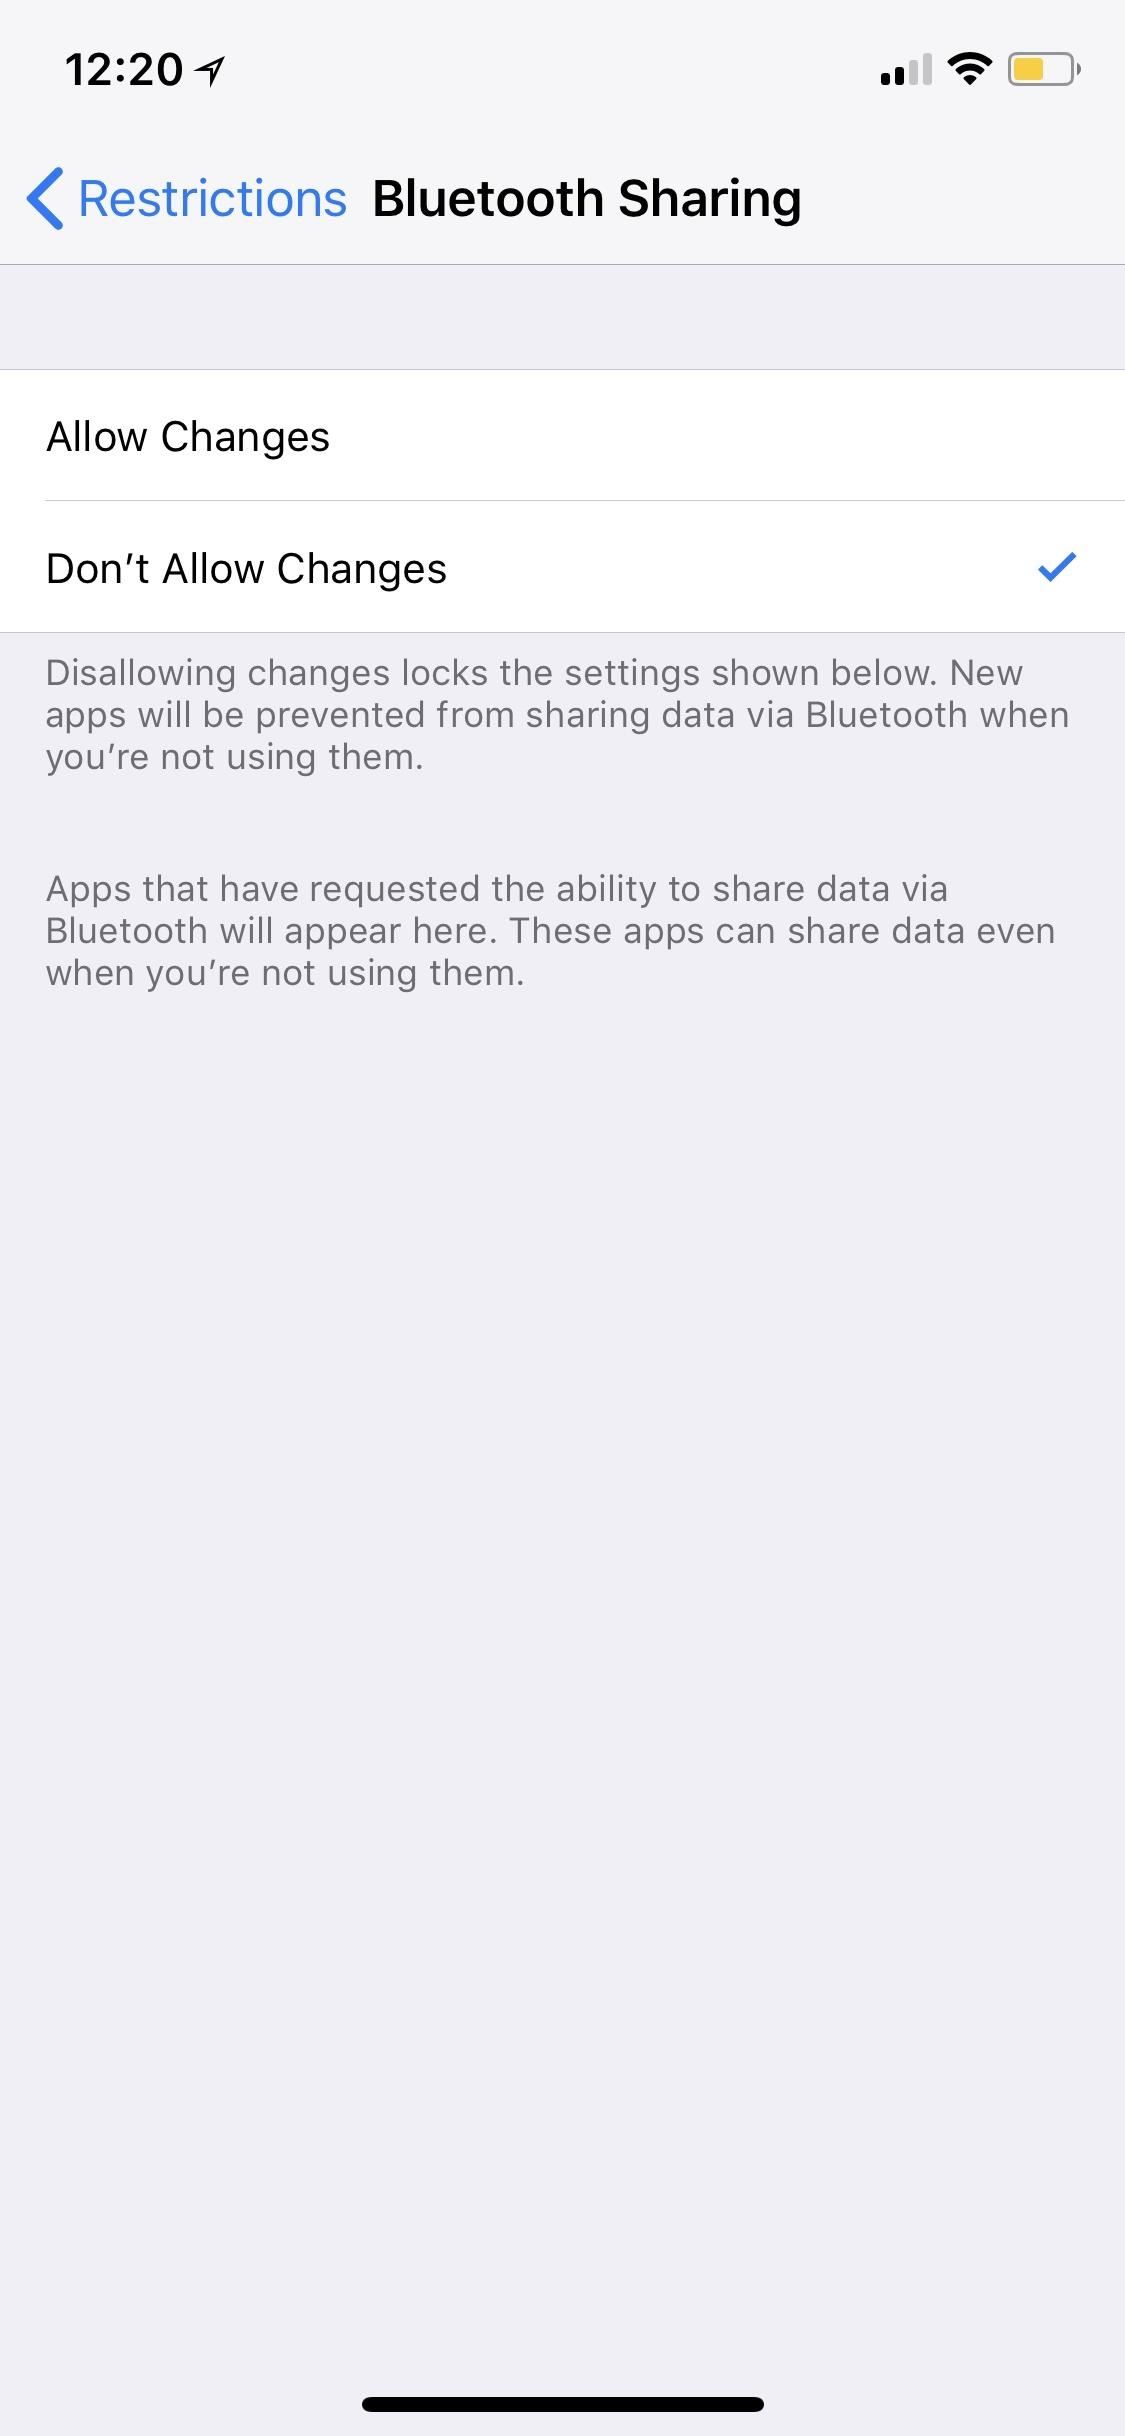 How to Hide or Restrict Apps, Features, Content & Settings on an iPhone